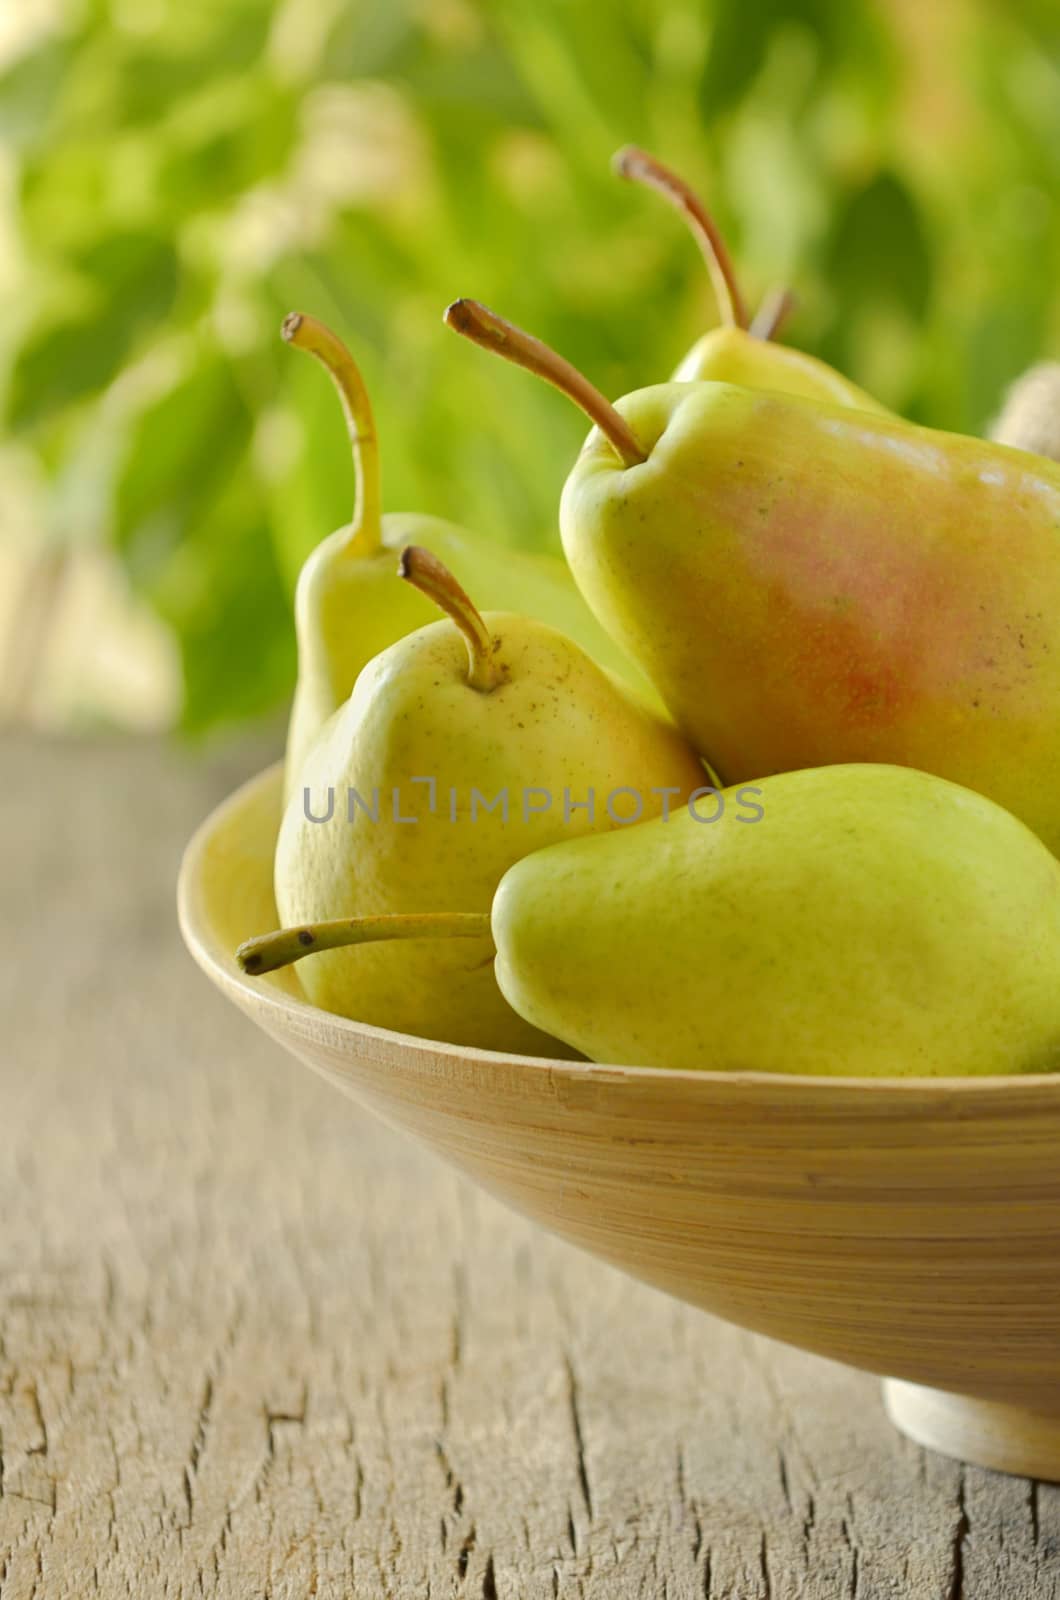 flavorful pears by mady70